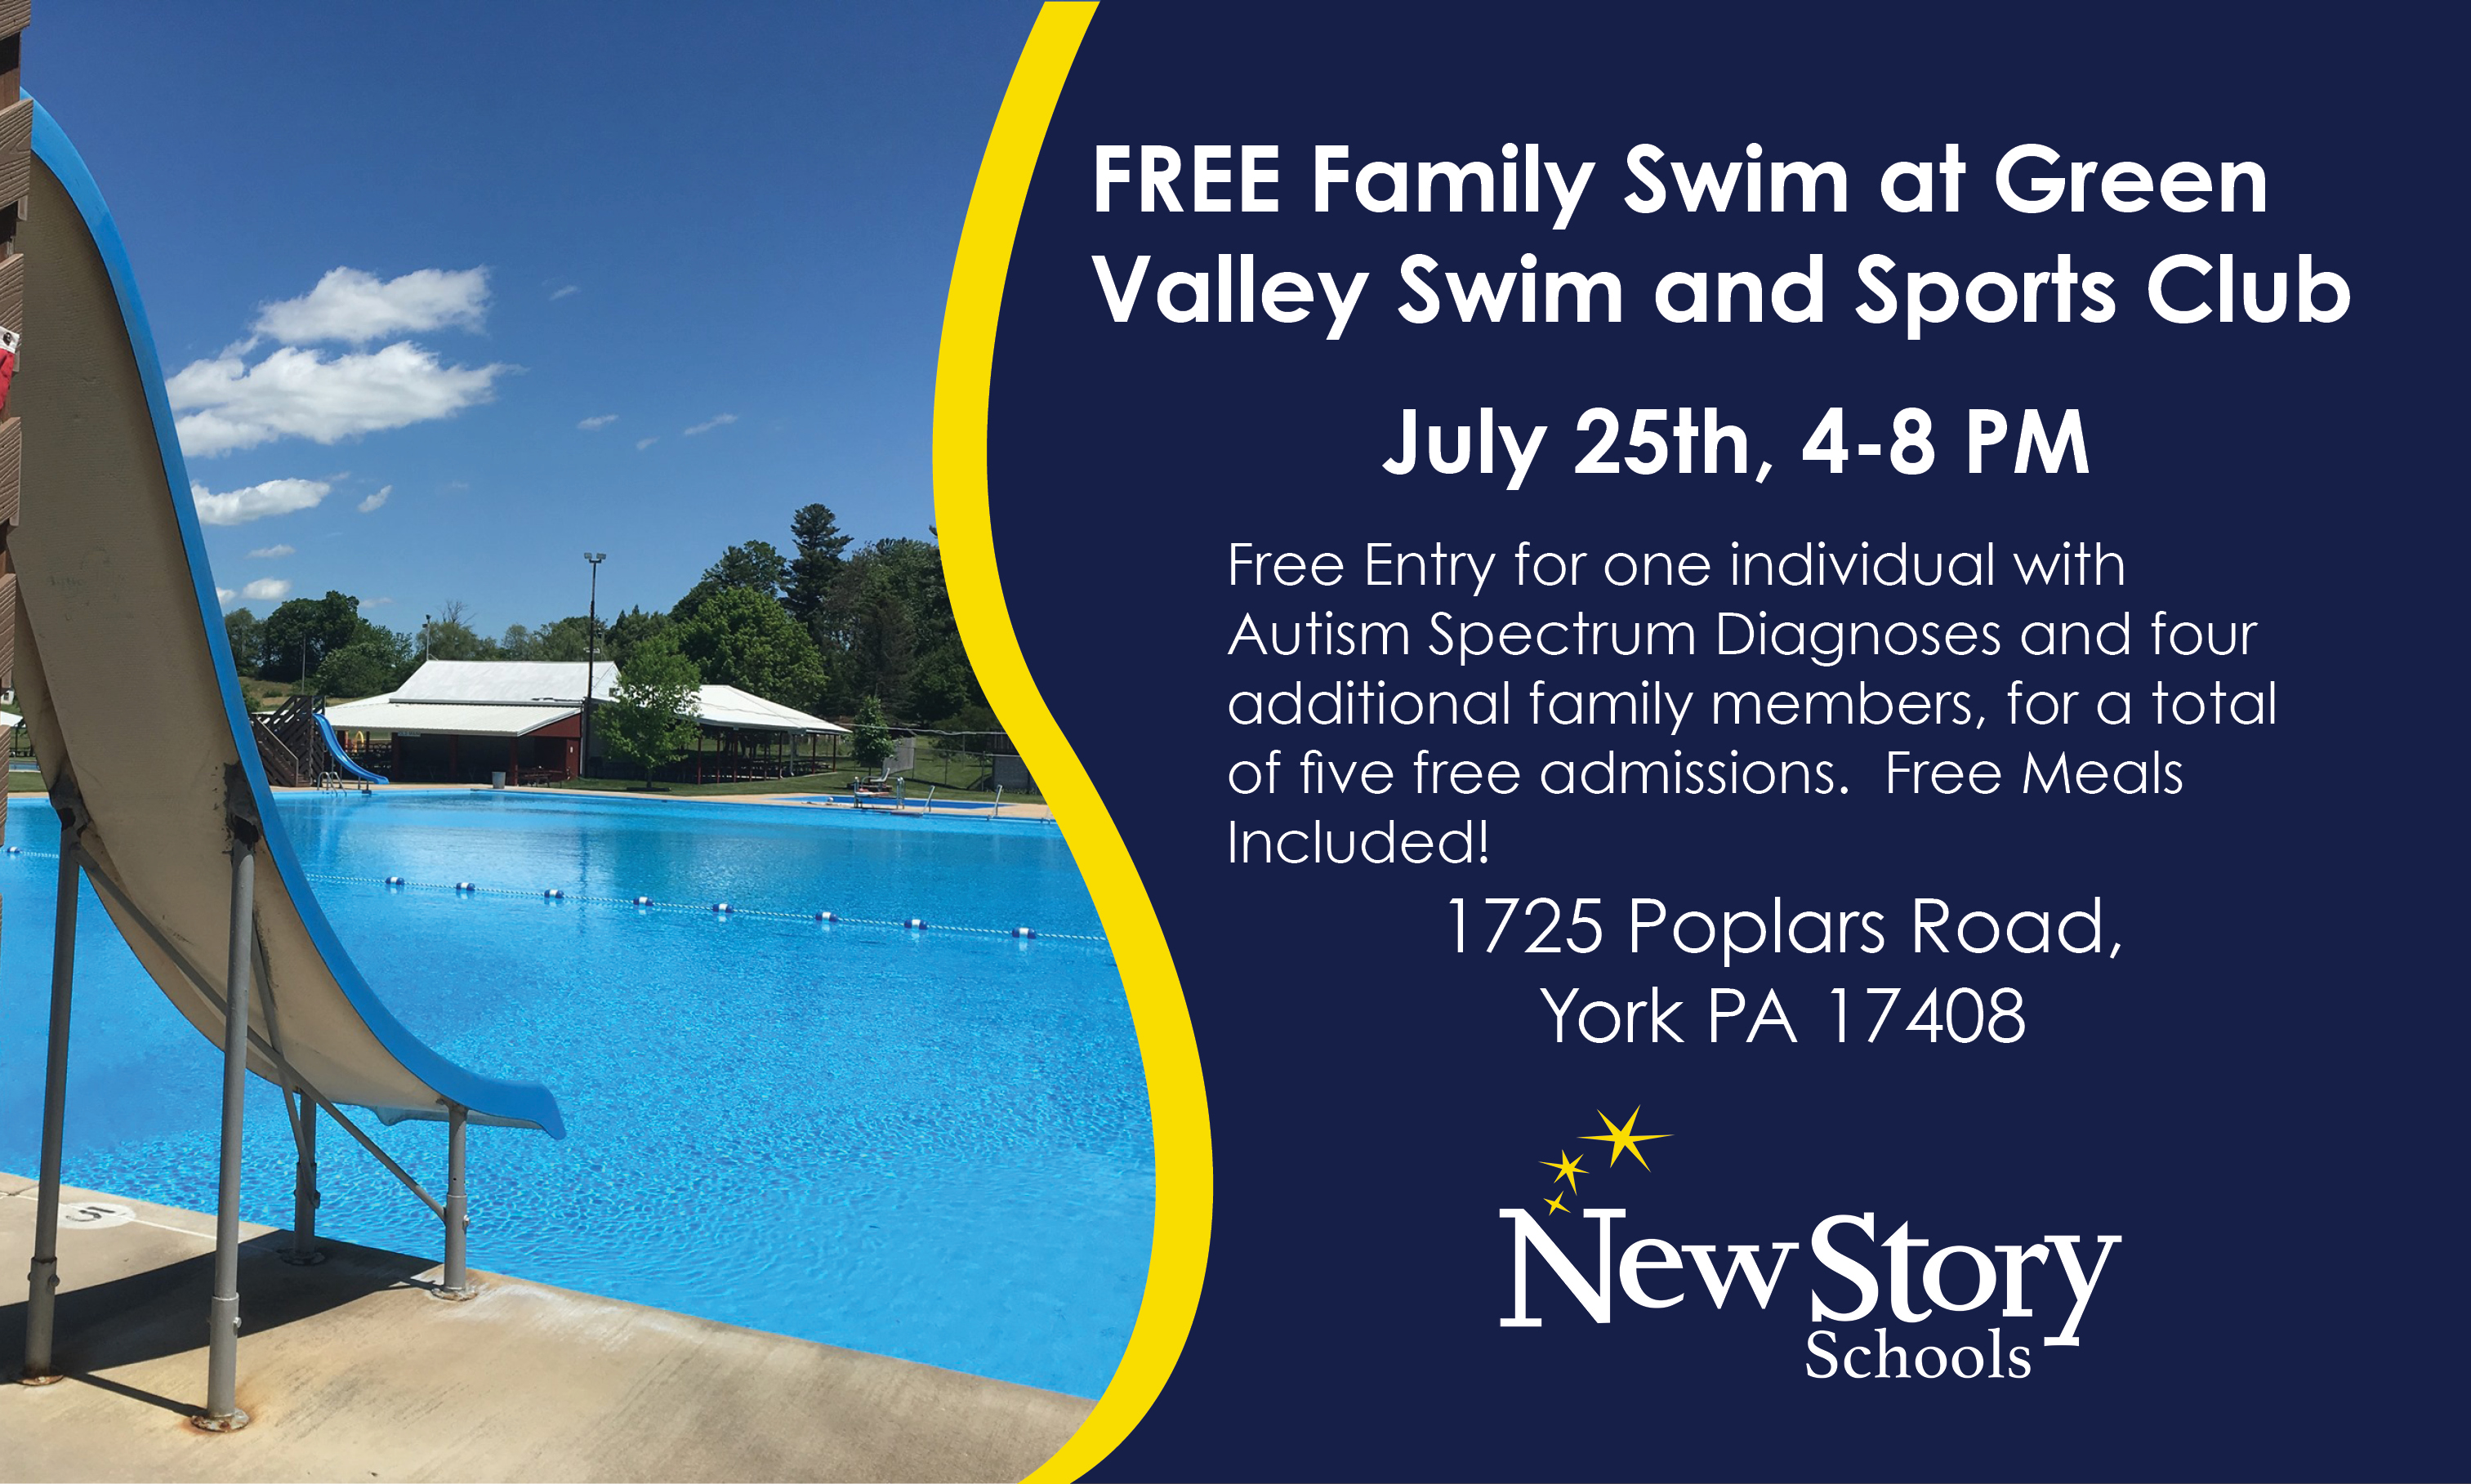 Green Valley Swim. Picture of pool and slide. Free entrance and free meal to individuals and their families with autism diagnoses.